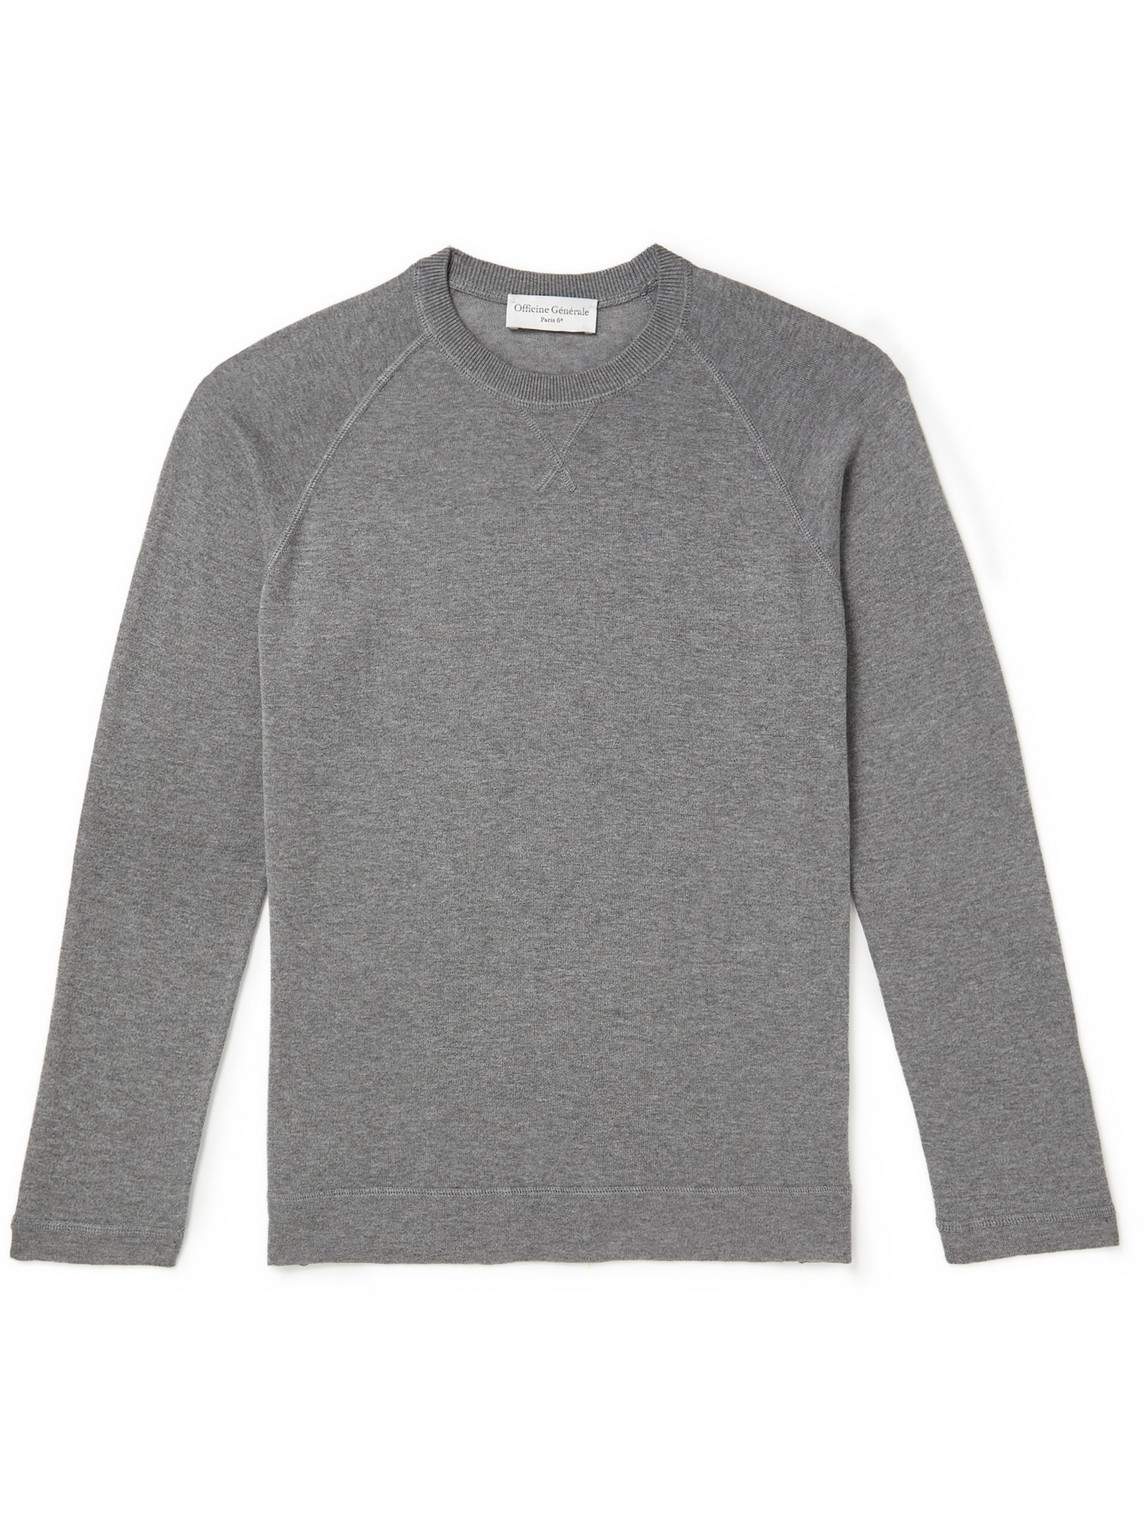 Officine Générale Nate Cotton and Lyocell-Blend Sweater